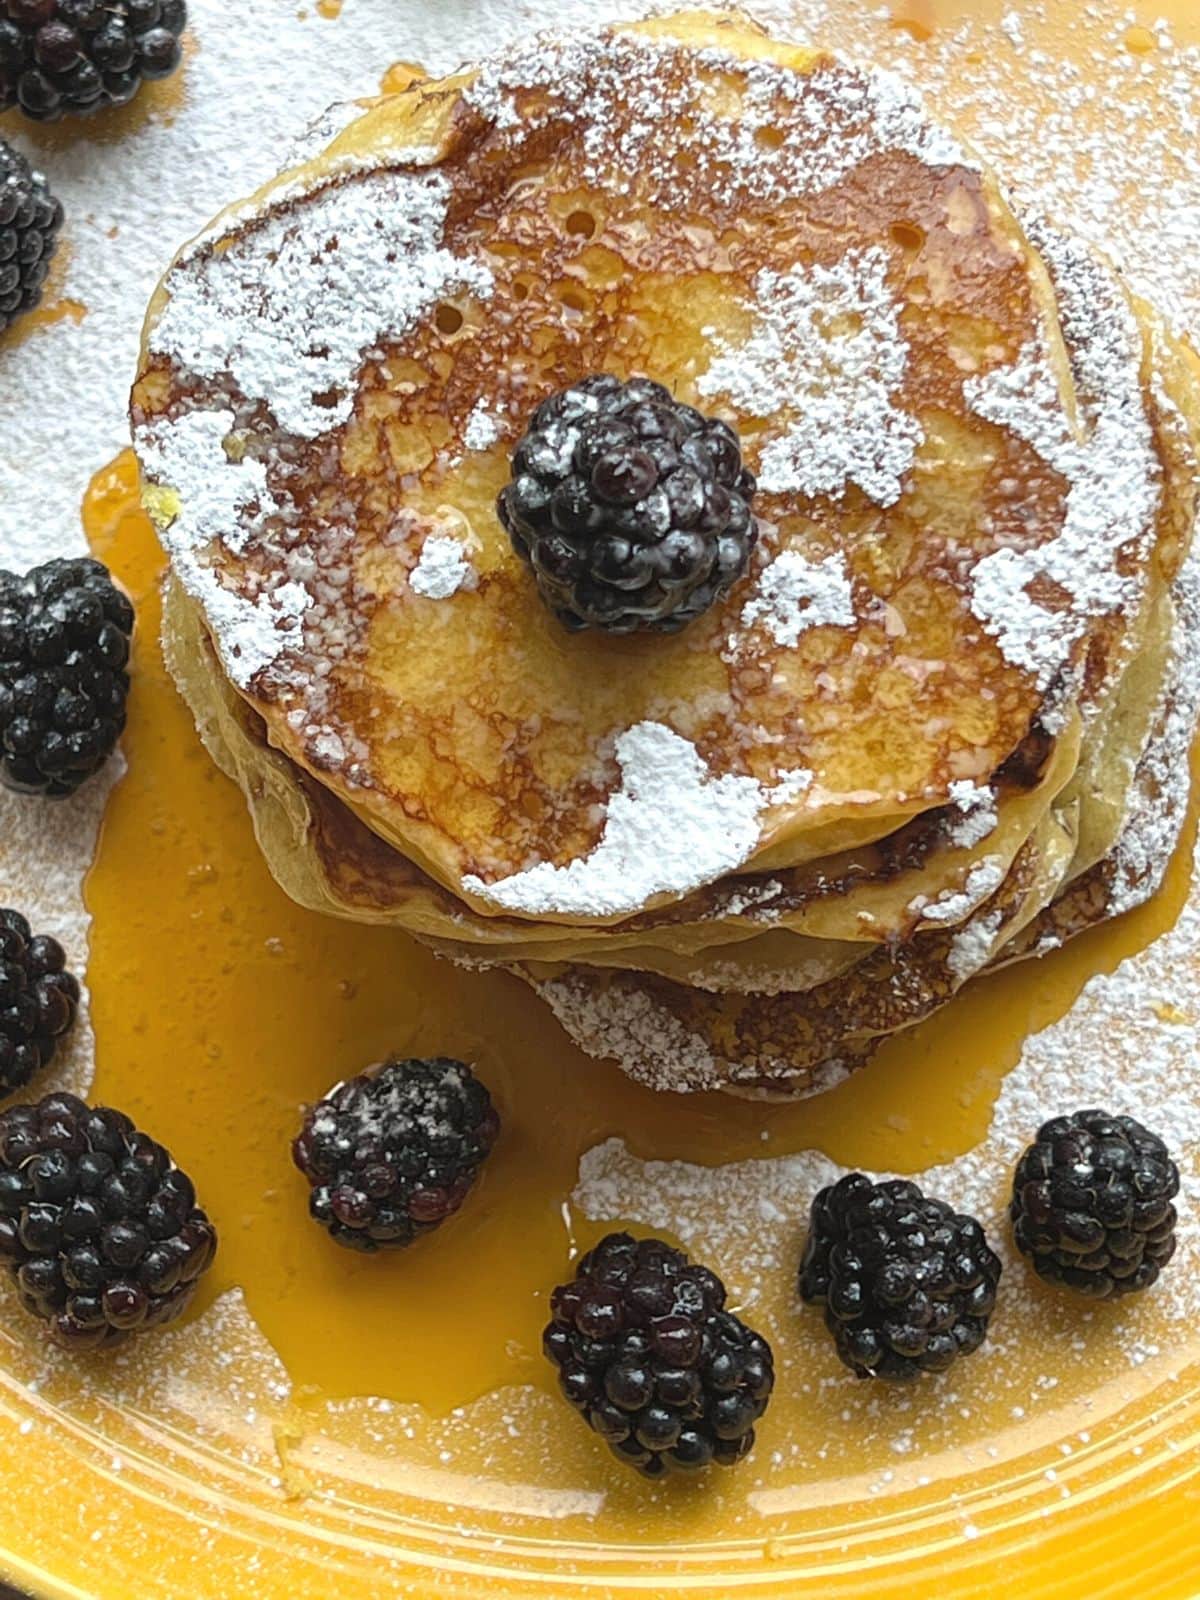 Stacked pancakes with syrup and blackberries.